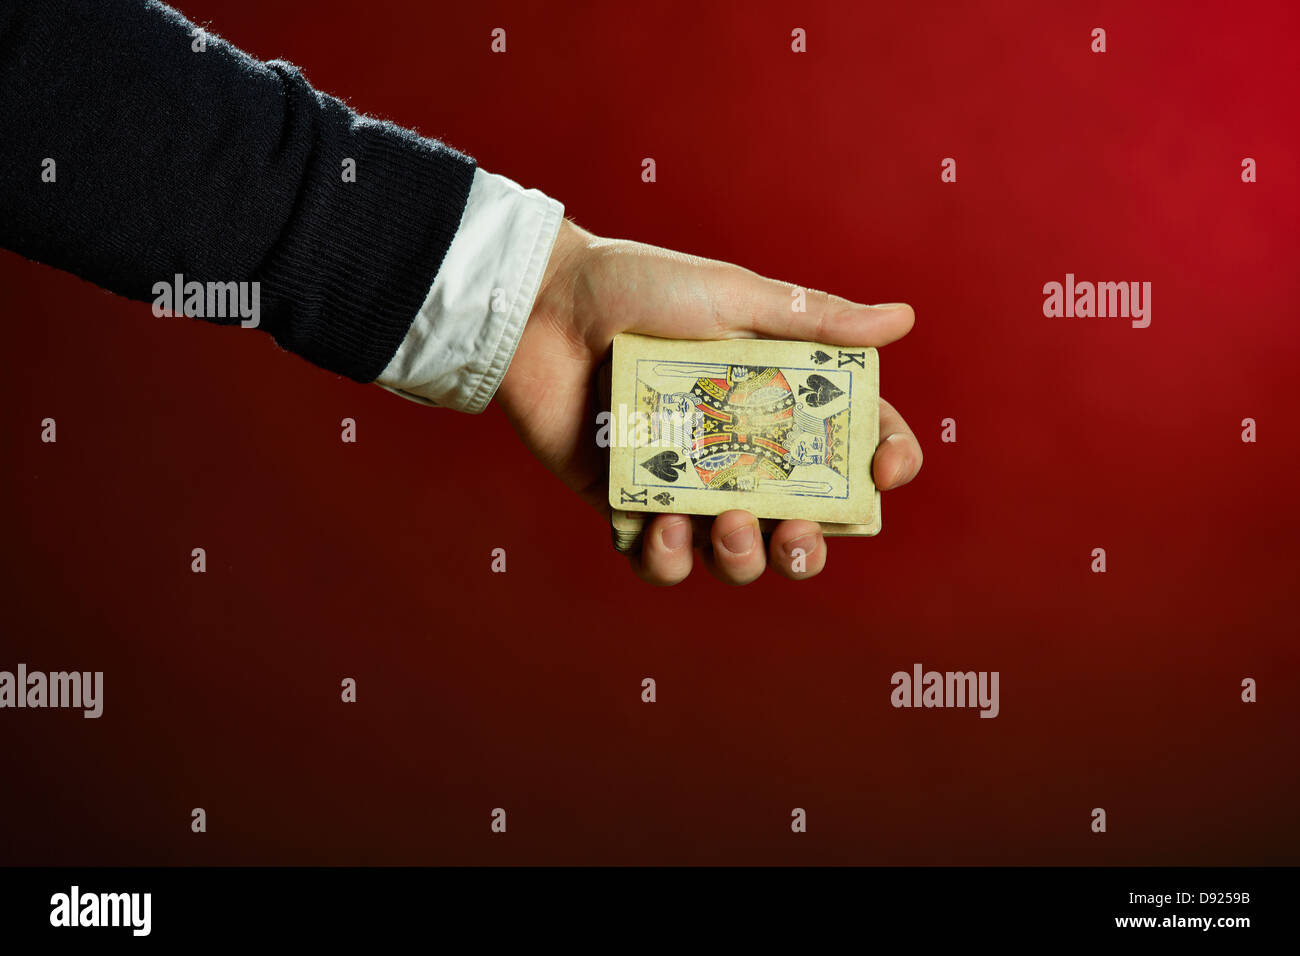 Male hand holding playing cards over red background. Stock Photo